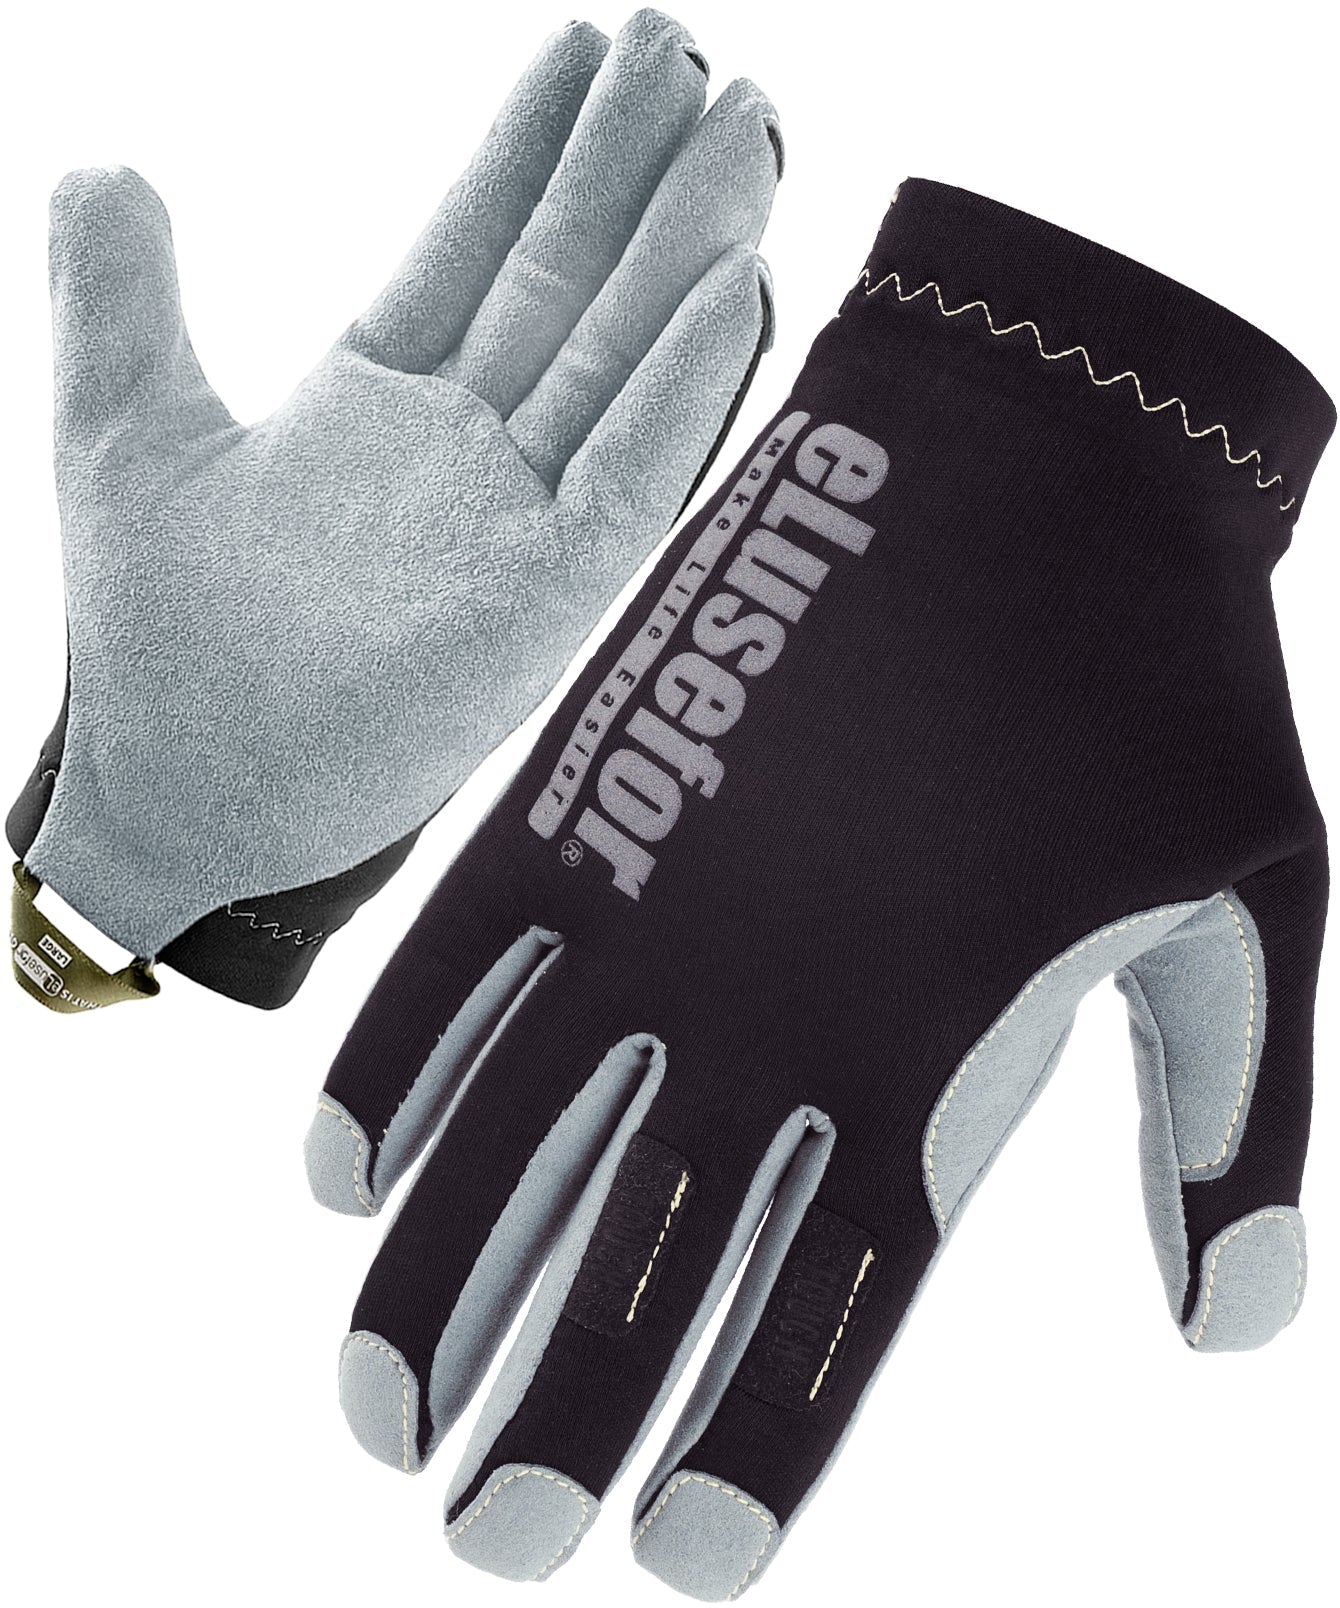 Easy Fit Men's Gloves, .55mm Soft Palm, ClickPoint Touch, No for Badge